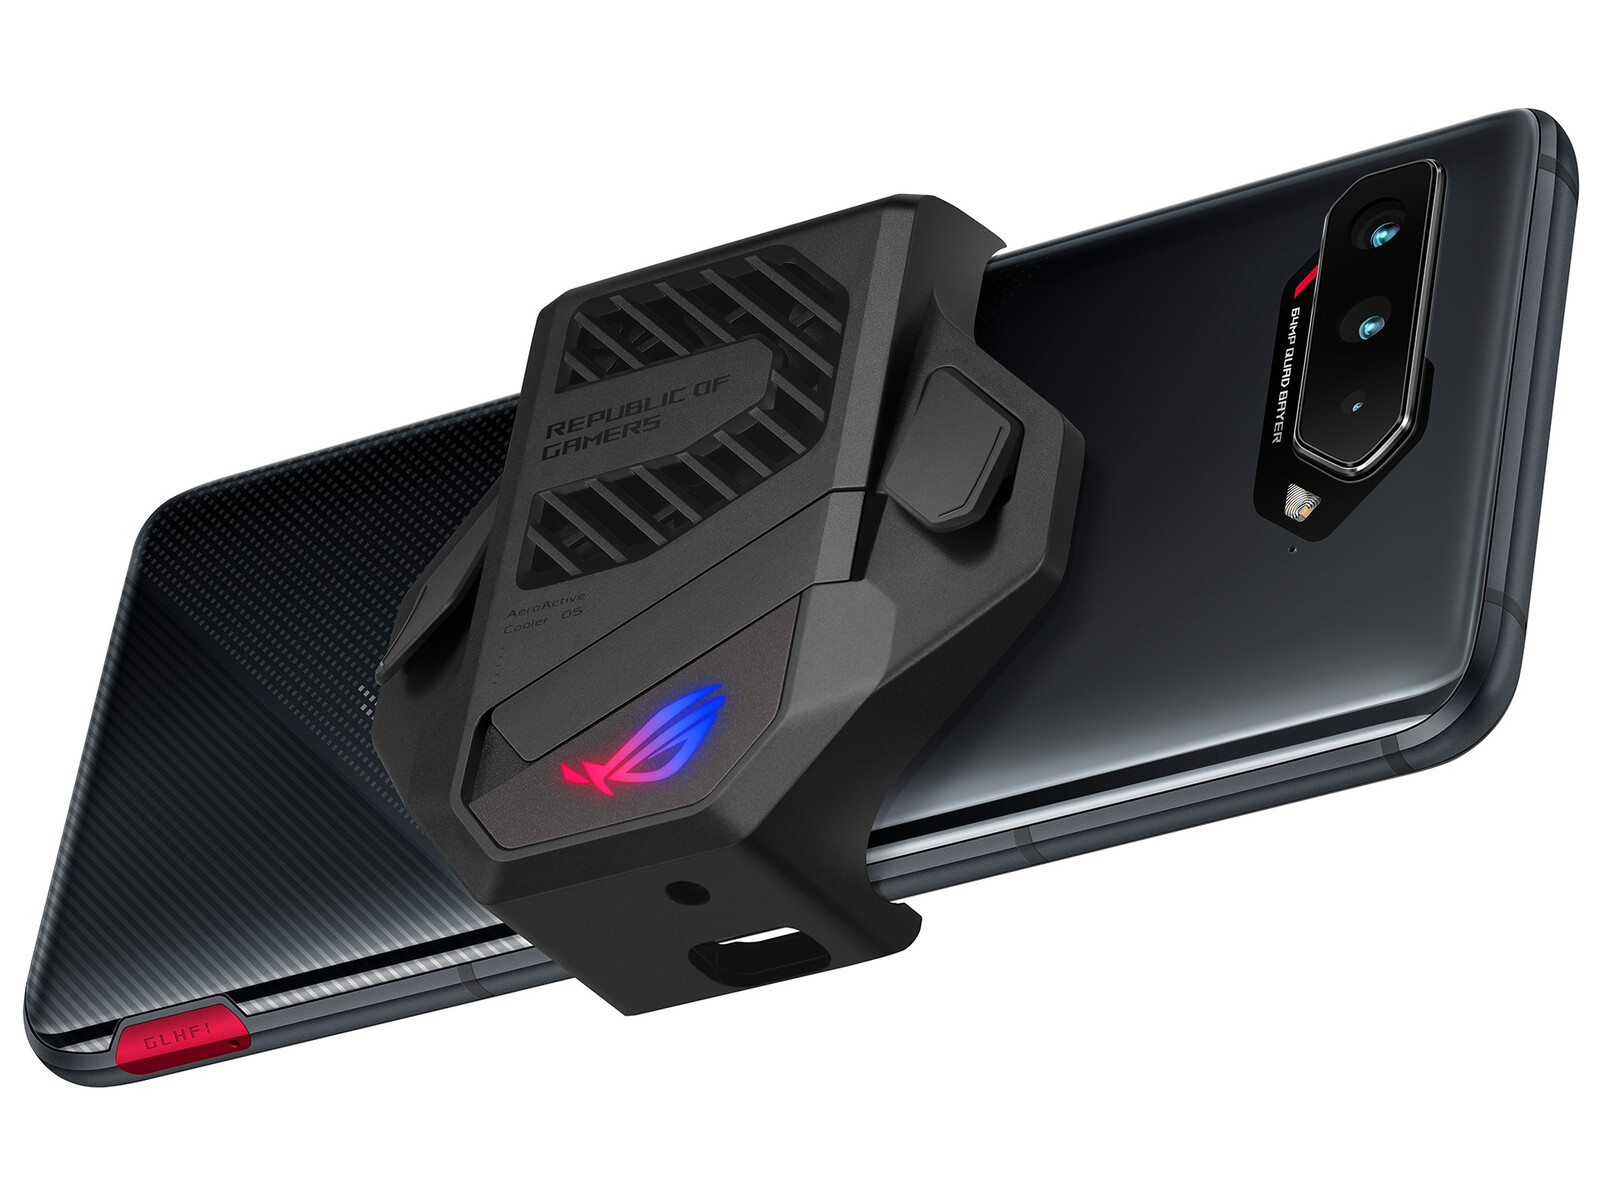 Asus ROG Phone 5S Review: The Best Gaming Smartphone You Can Get, But Might  be Overkill for Casual Users